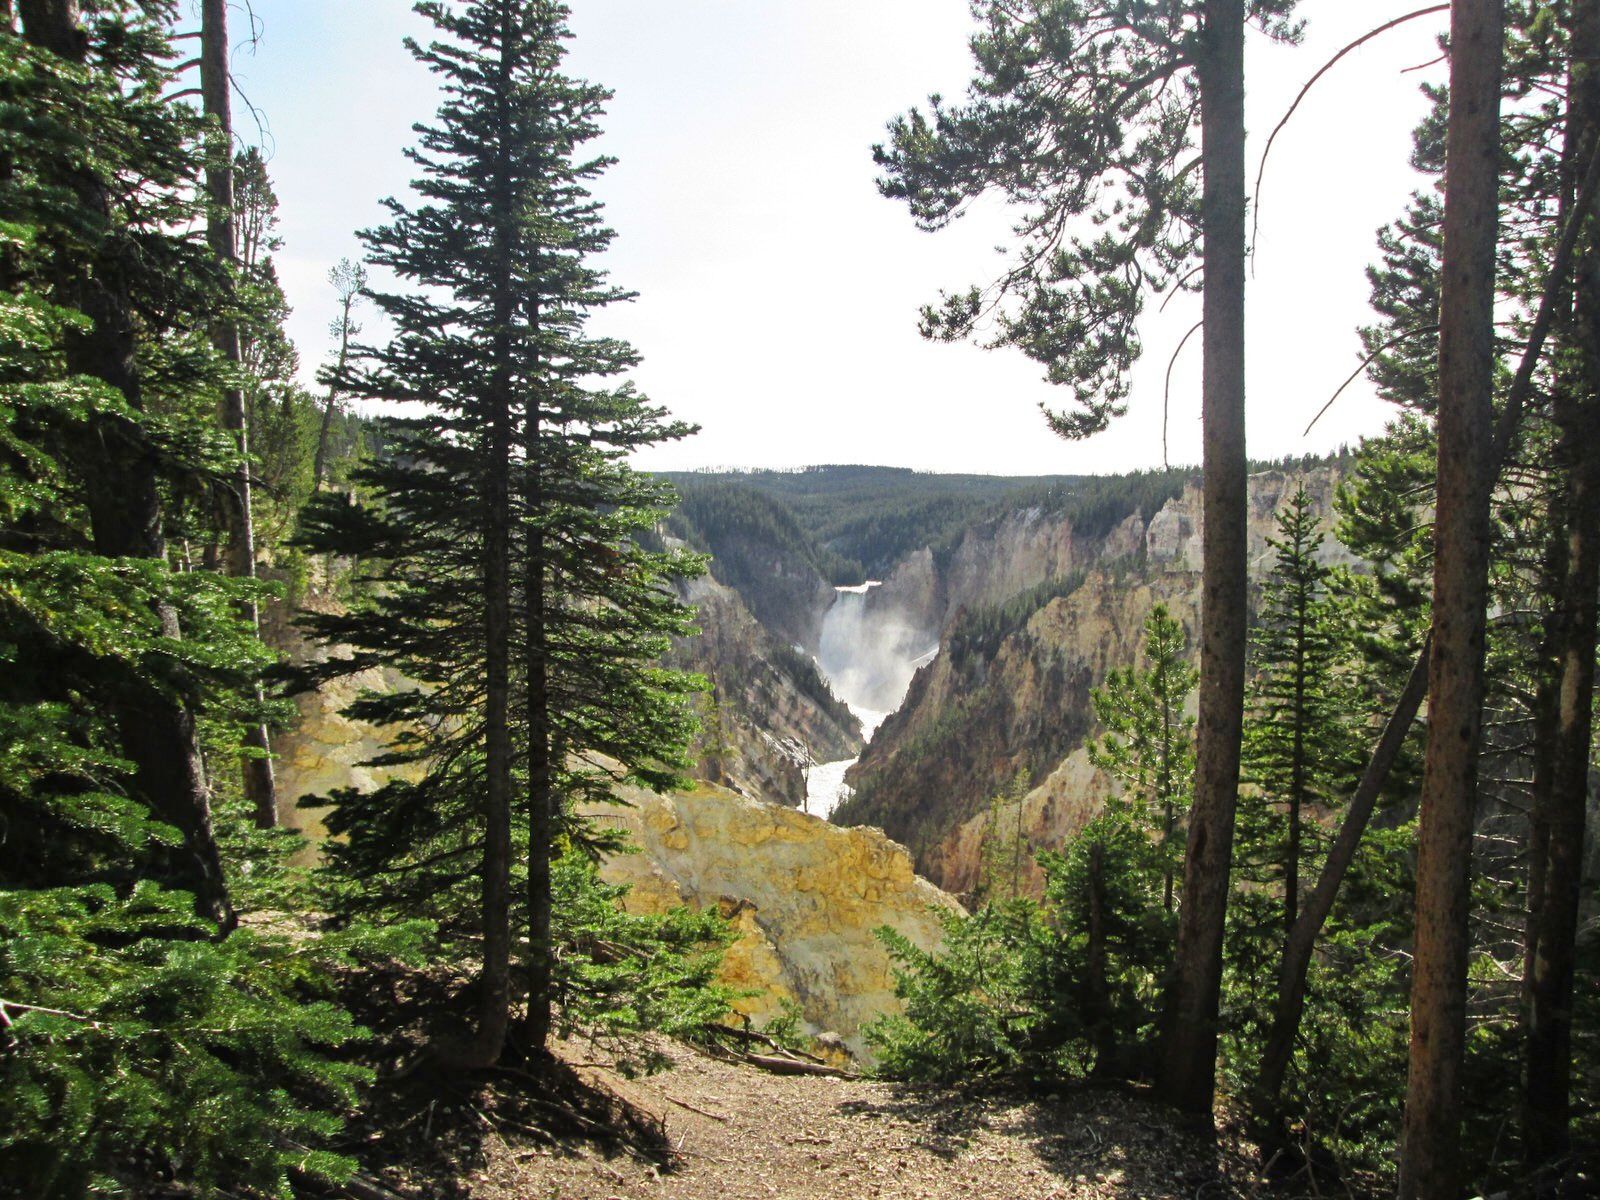 View from the South Rim Trail, near Artist's Point, Yellowstone National Park. Photo by Valerie A. Russo.